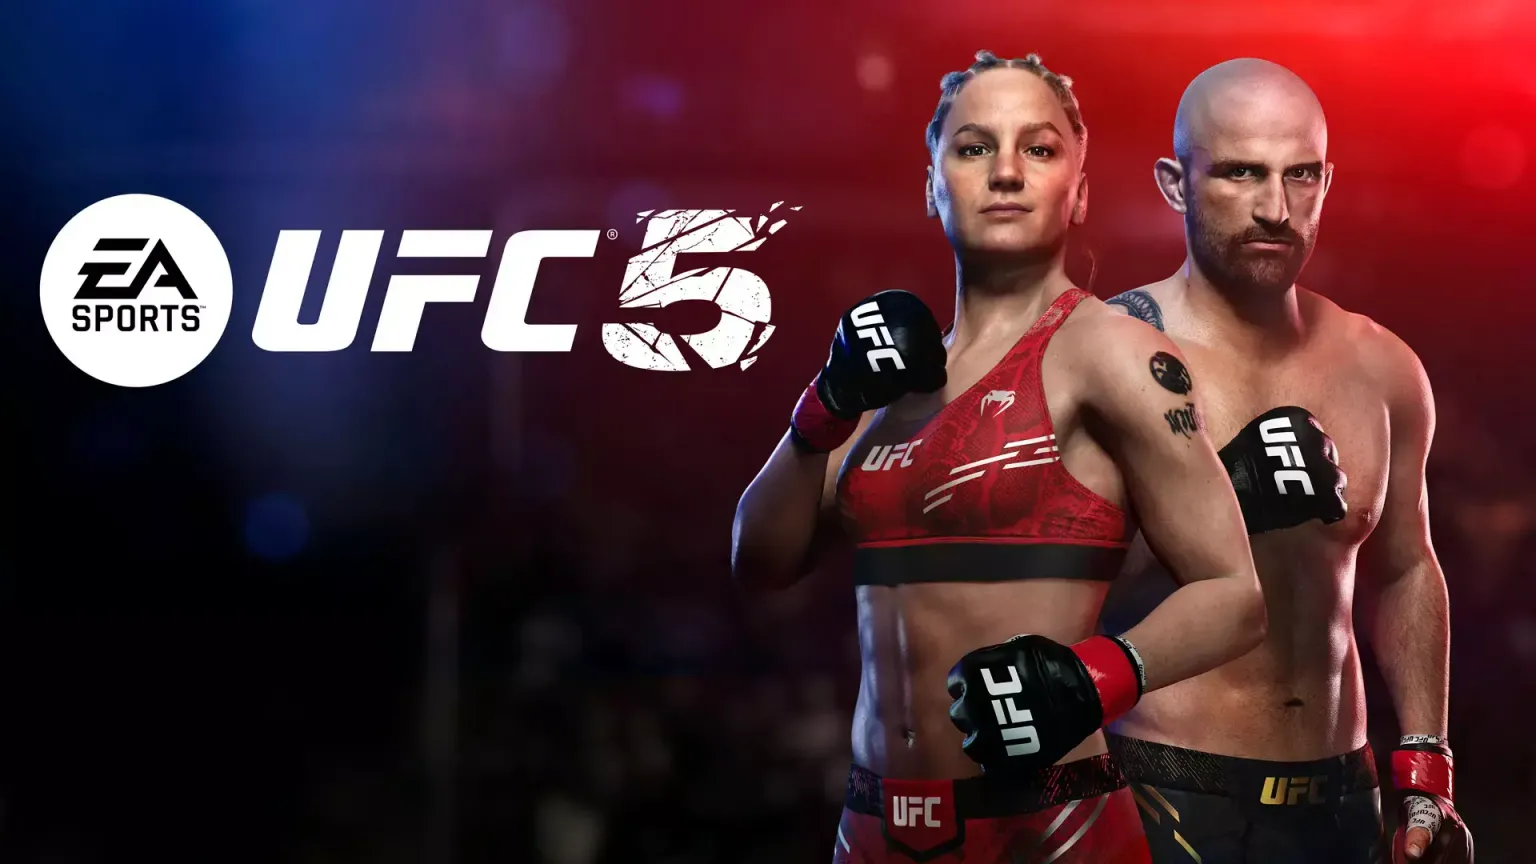 Artwork from UFC 5. Image: EA Sports